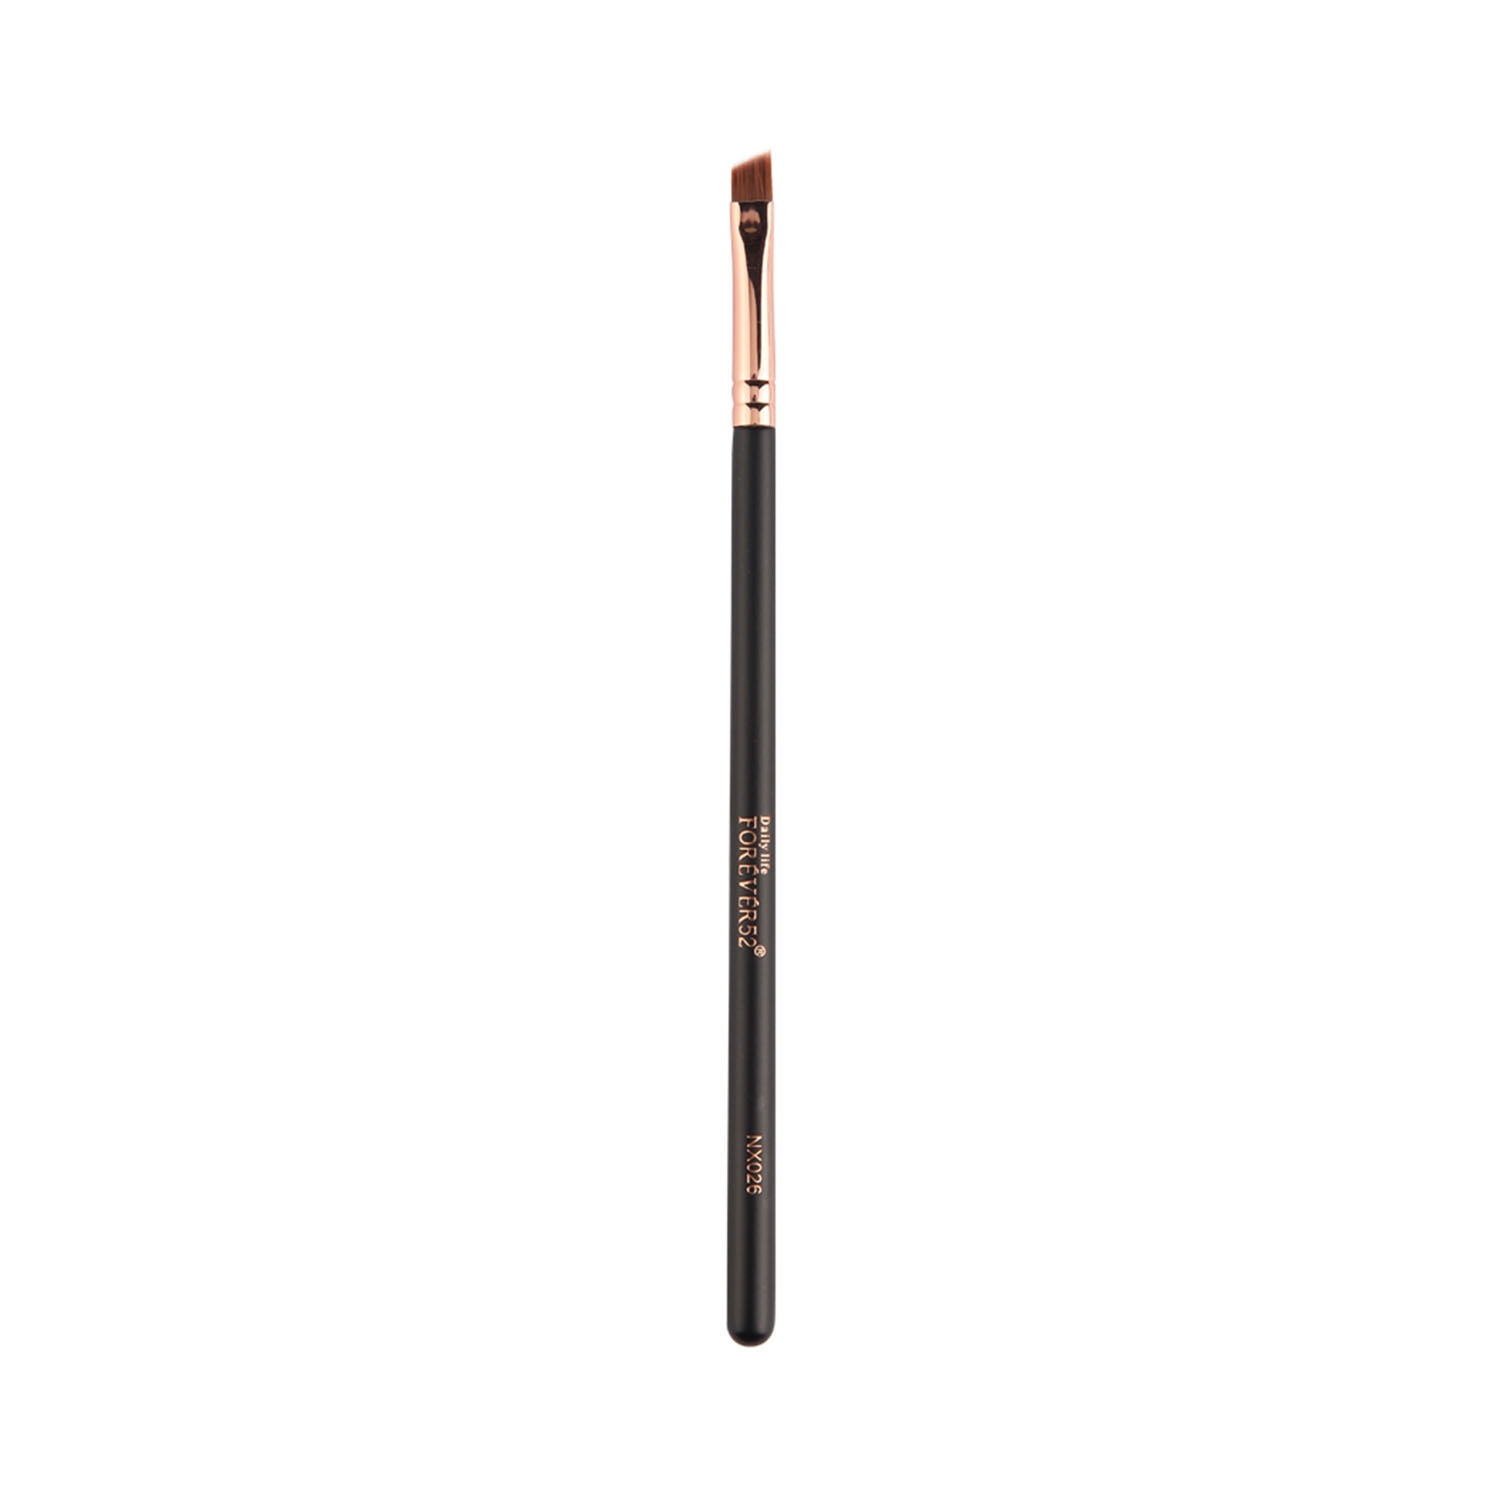 Daily Life Forever52 | Daily Life Forever52 Eye Brow Brush - NX026 (1Pc)